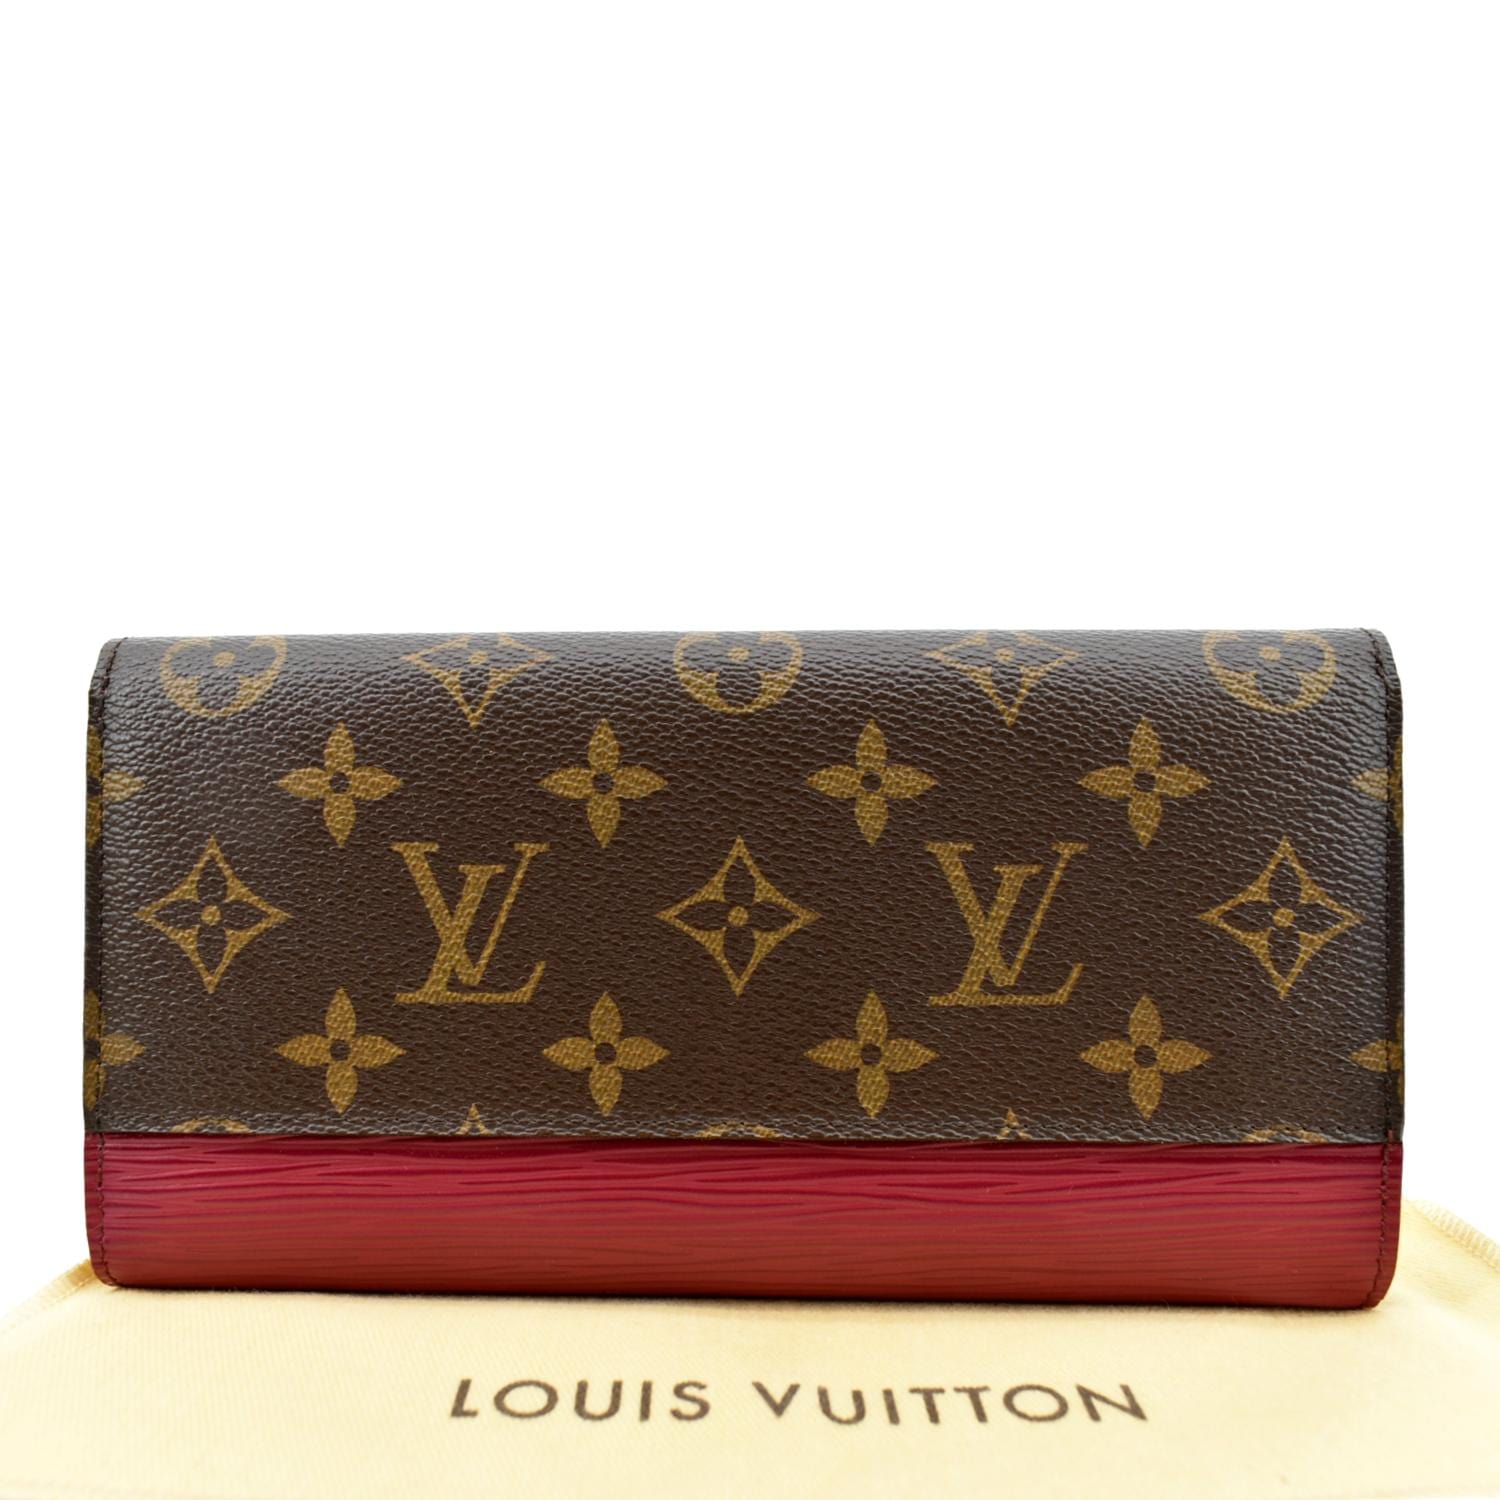 Louis Vuitton Limited Edition Sunglasses My Monogram Round Red